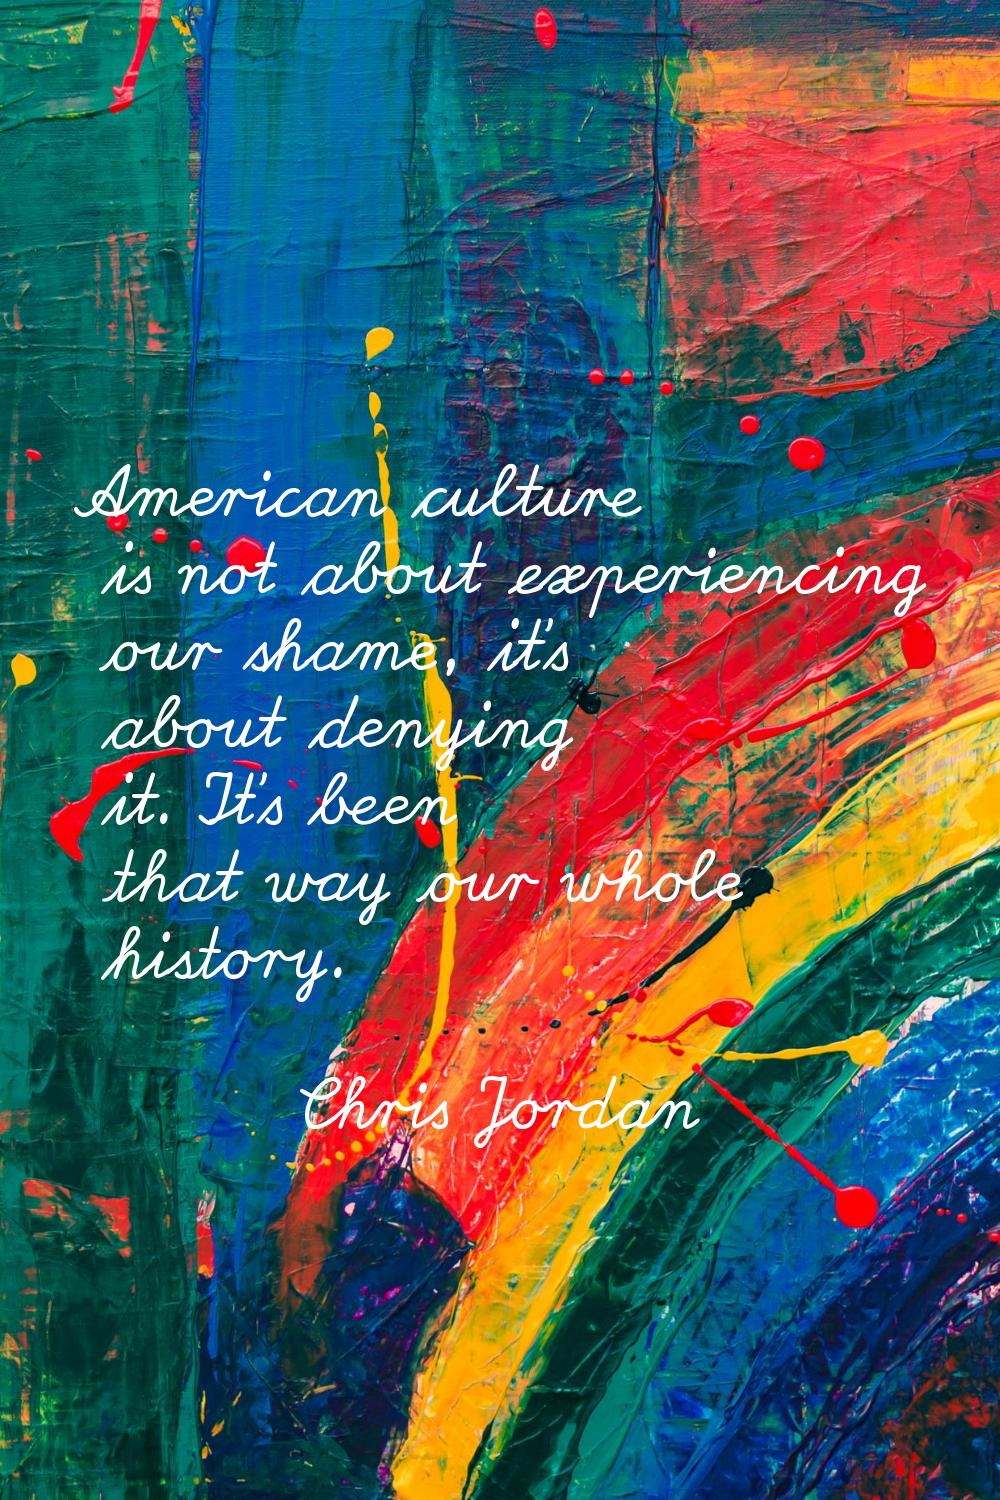 American culture is not about experiencing our shame, it's about denying it. It's been that way our